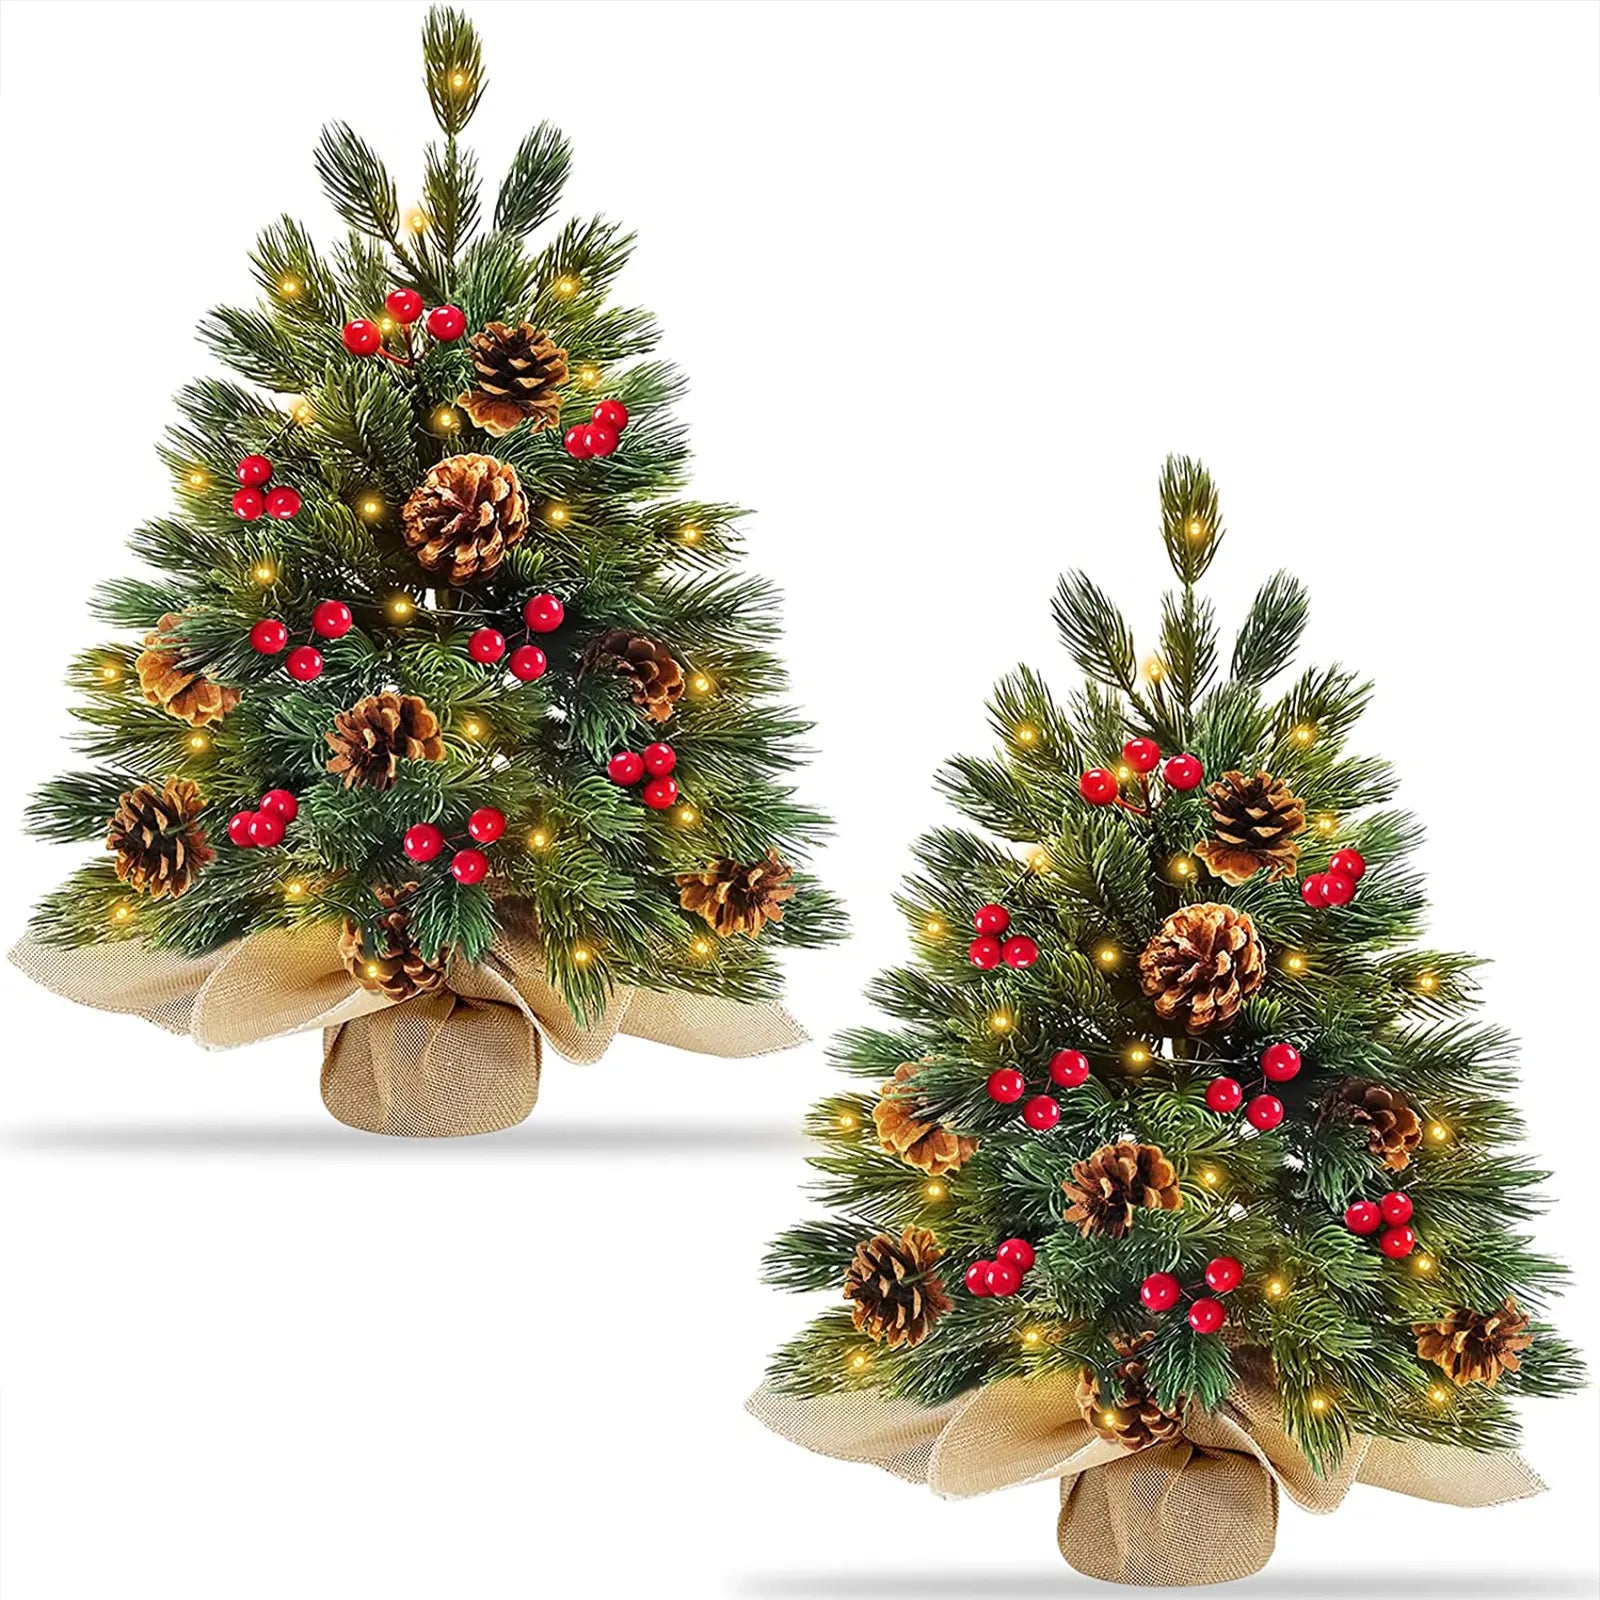 2 Pack 20 Inch Super Thick Prelit Tabletop Christmas Tree Decor